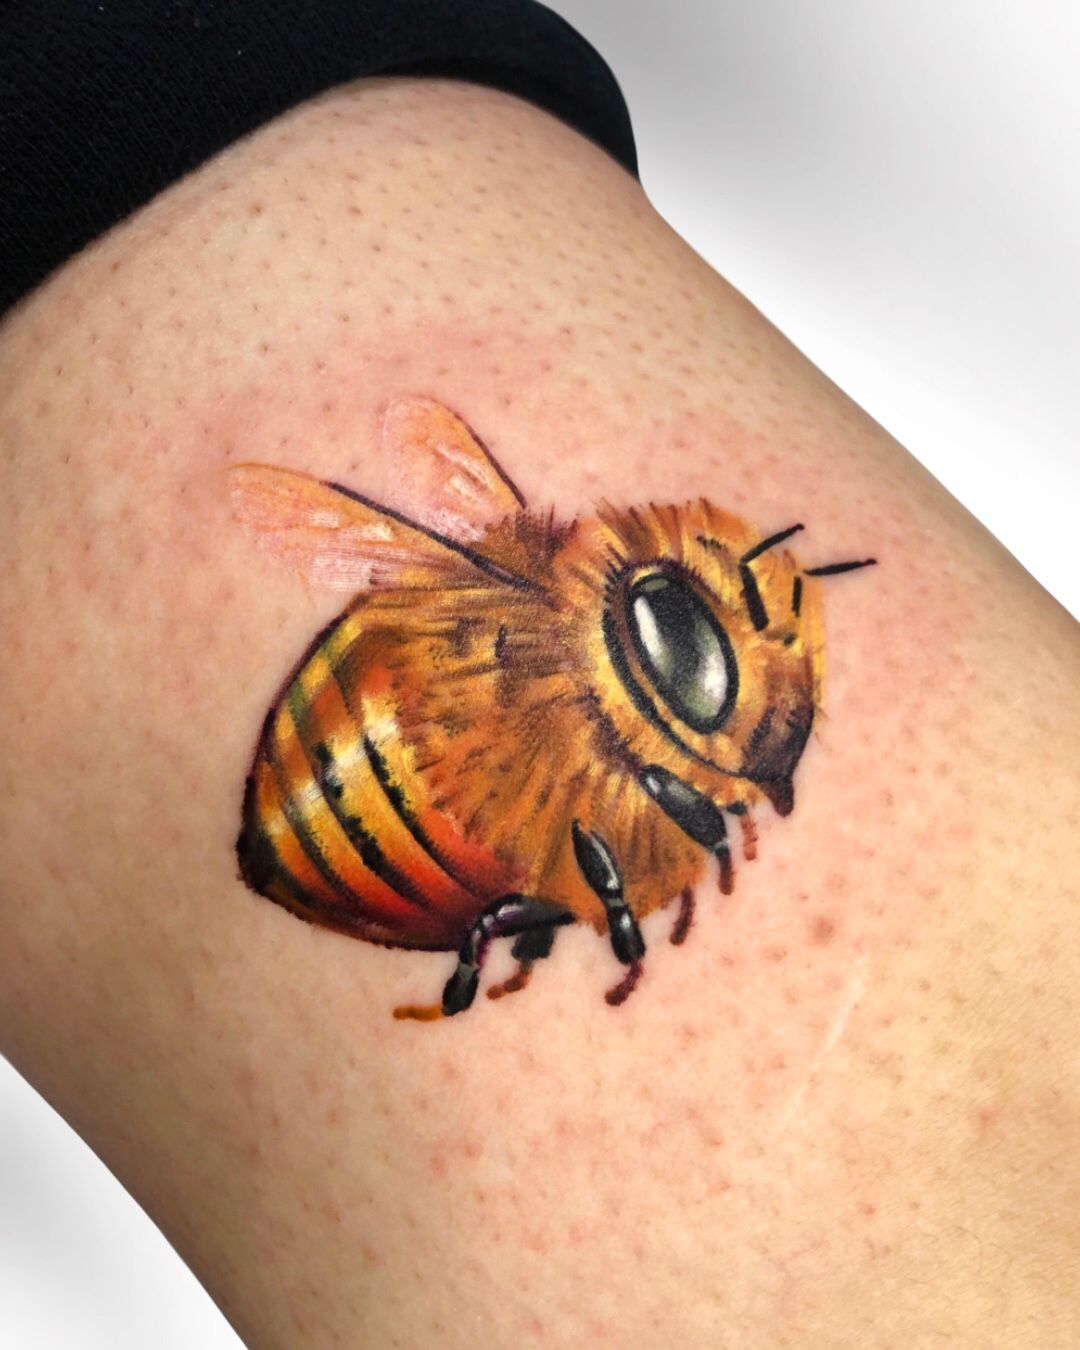 Finally got my beautiful bee done by Lee Humphries paragon Tattoo in hull  So incredibly happy with it   rtattoo